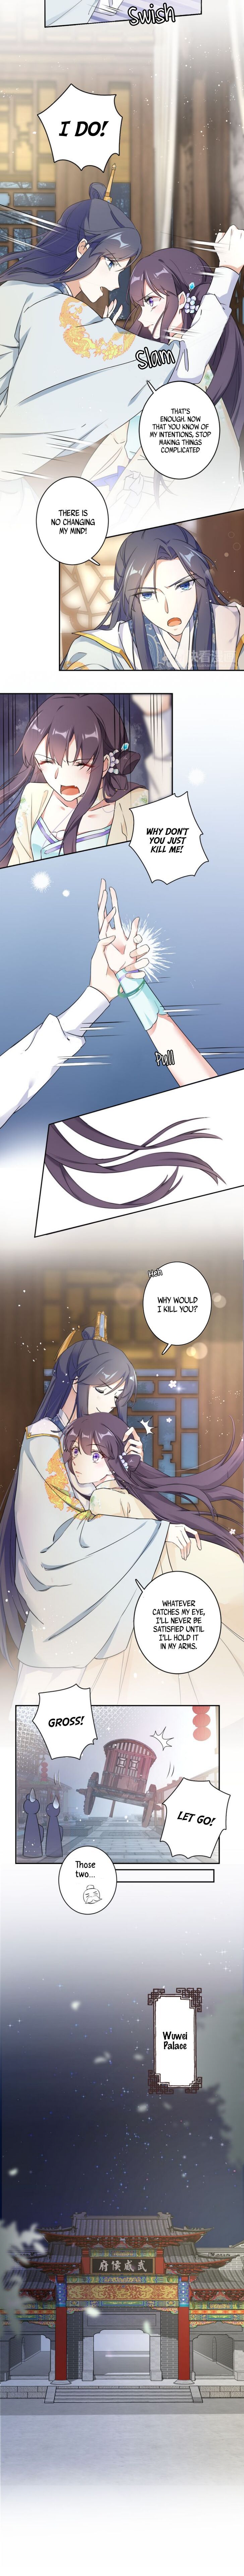 The Story of Hua Yan Chapter 008 page 6